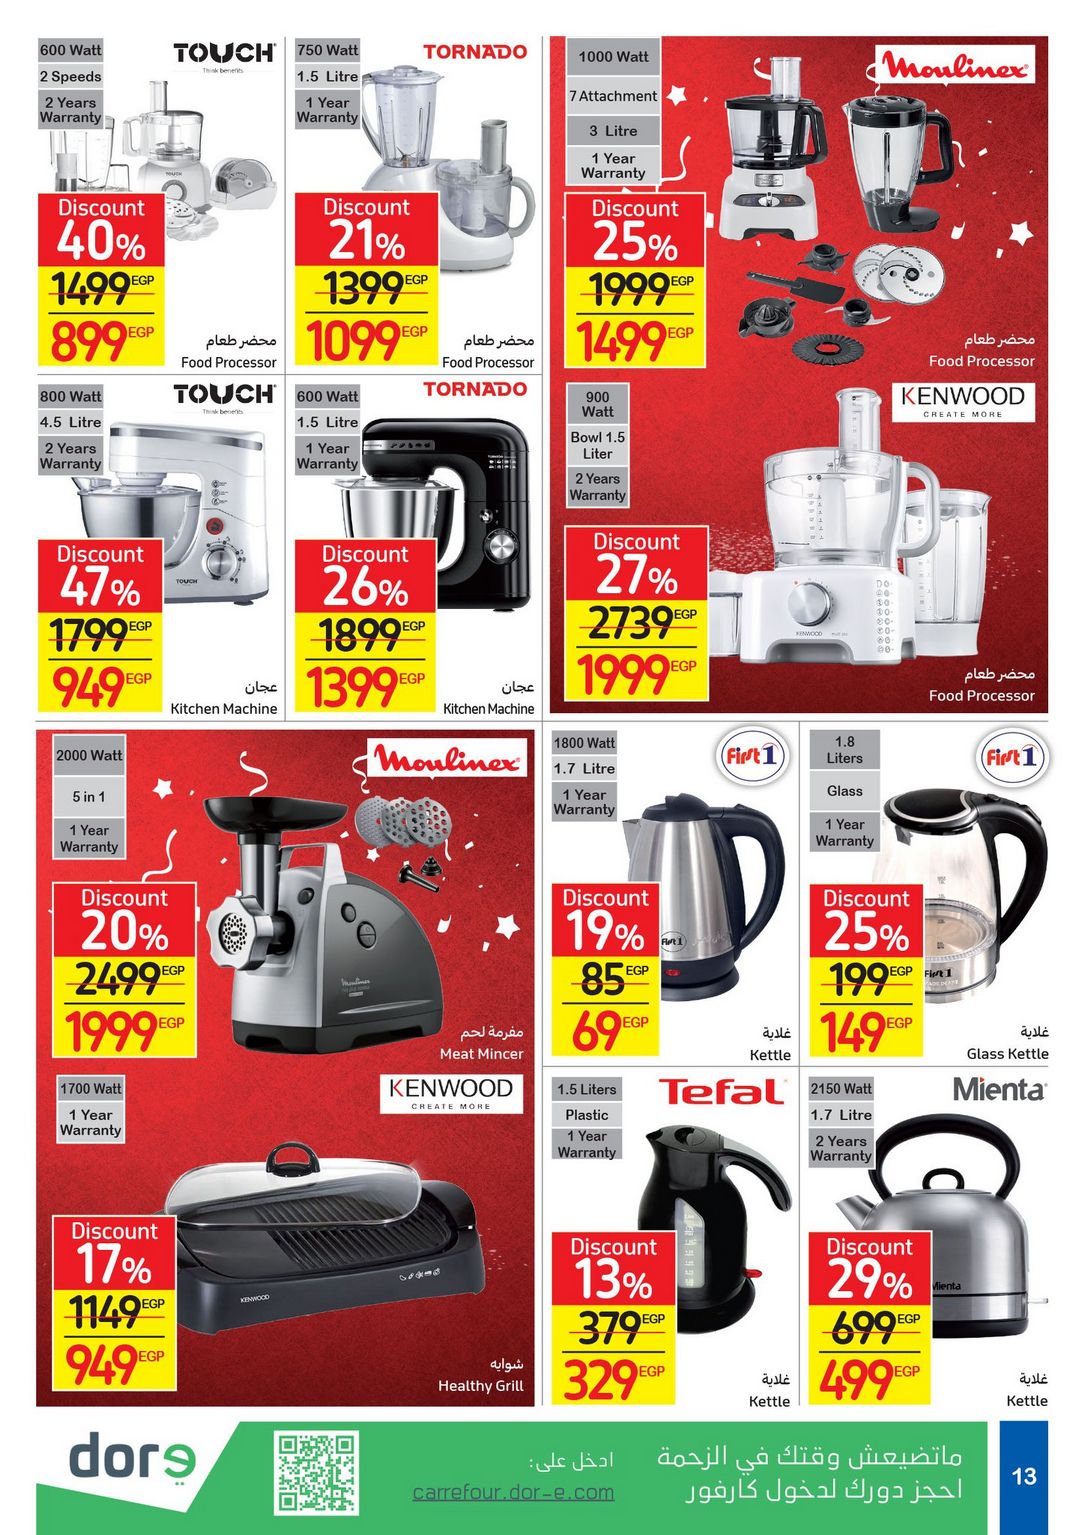 Carrefour Anniversary Offers till 18/2/2021 | Carrefour Egypt 15